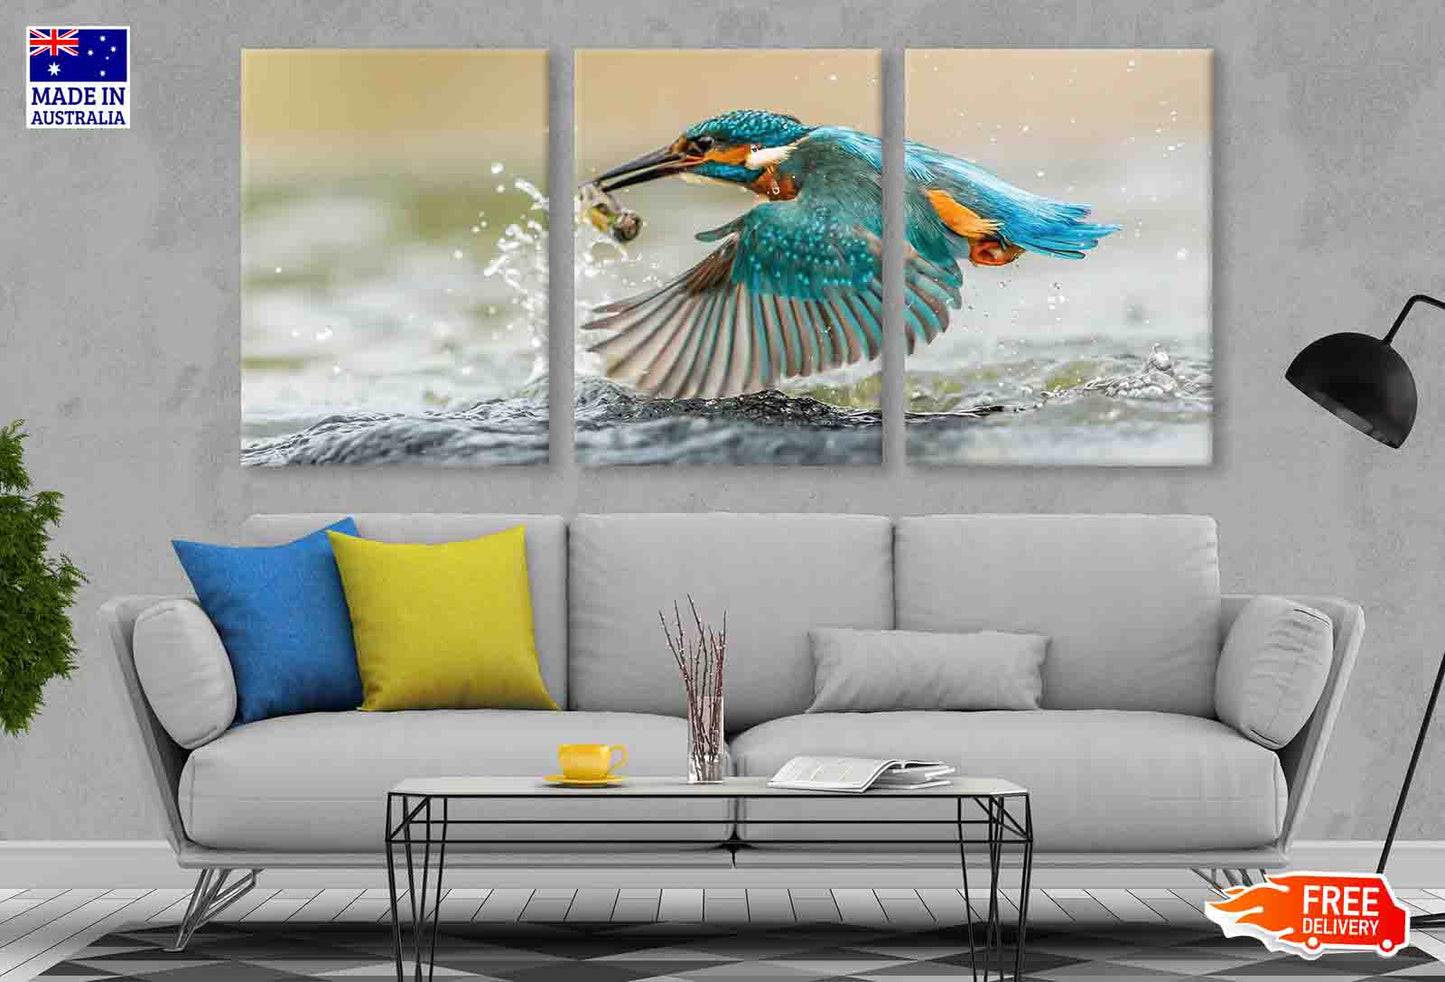 3 Set of Kingfisher Bird View Photograph High Quality Print 100% Australian Made Wall Canvas Ready to Hang